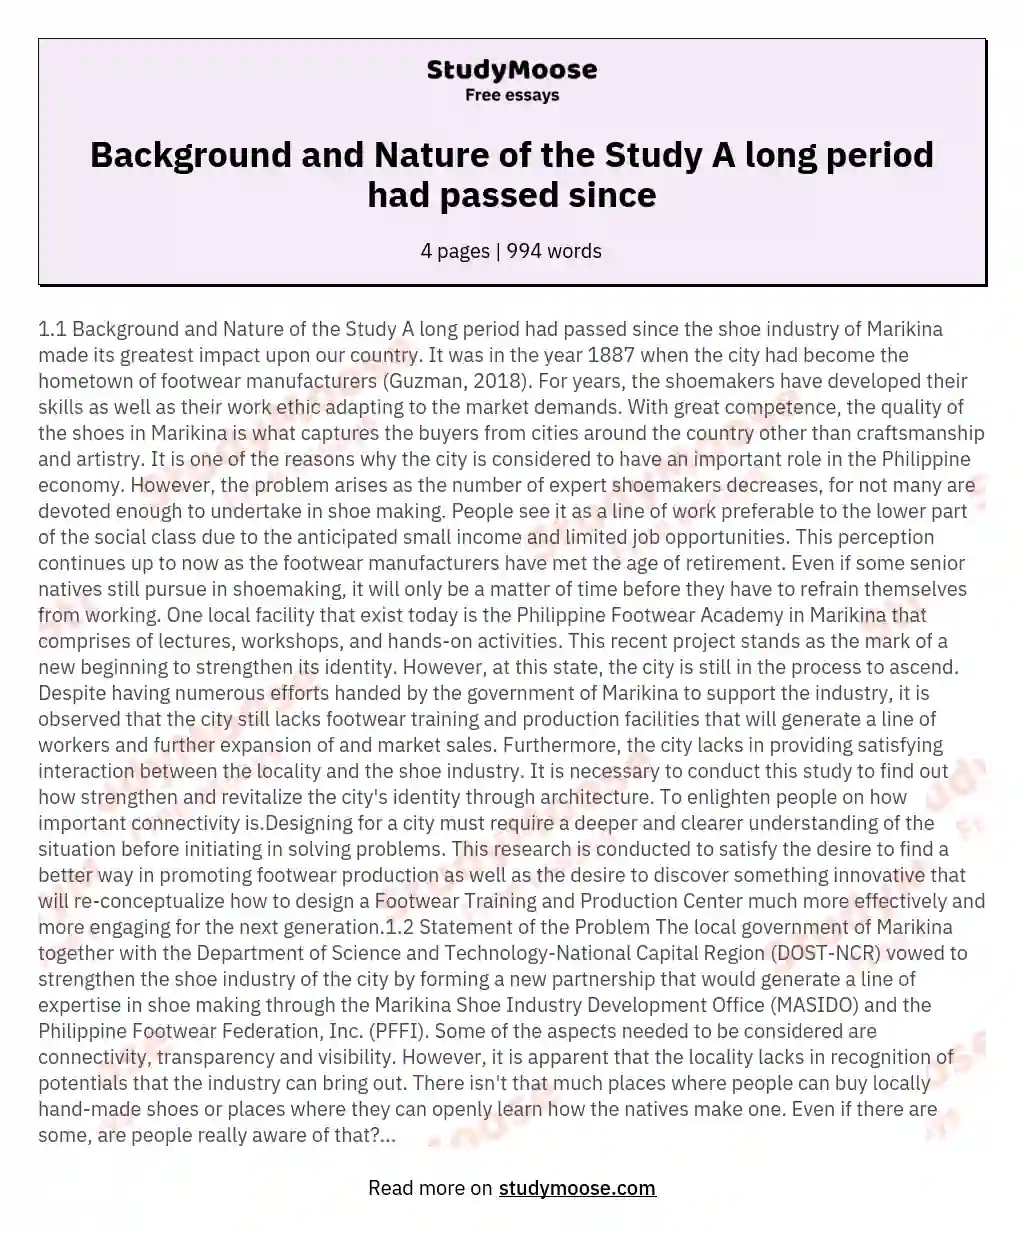 Background and Nature of the Study A long period had passed since essay